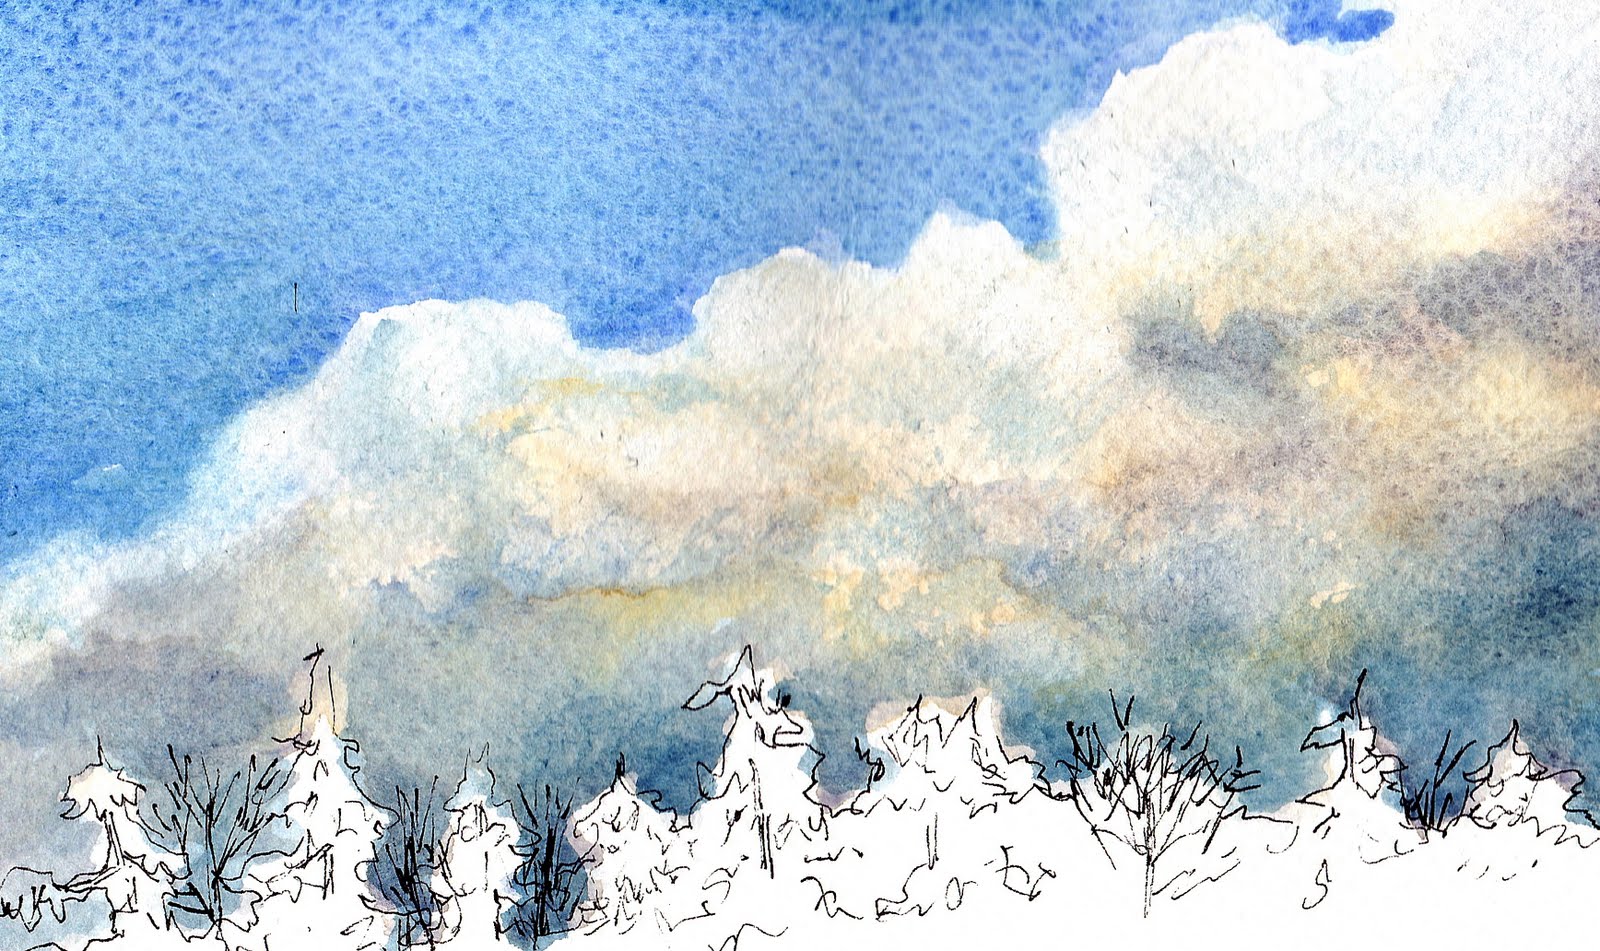 Whidbey Island Sketchers: CLOUDS OF MARCH, monthly challenge